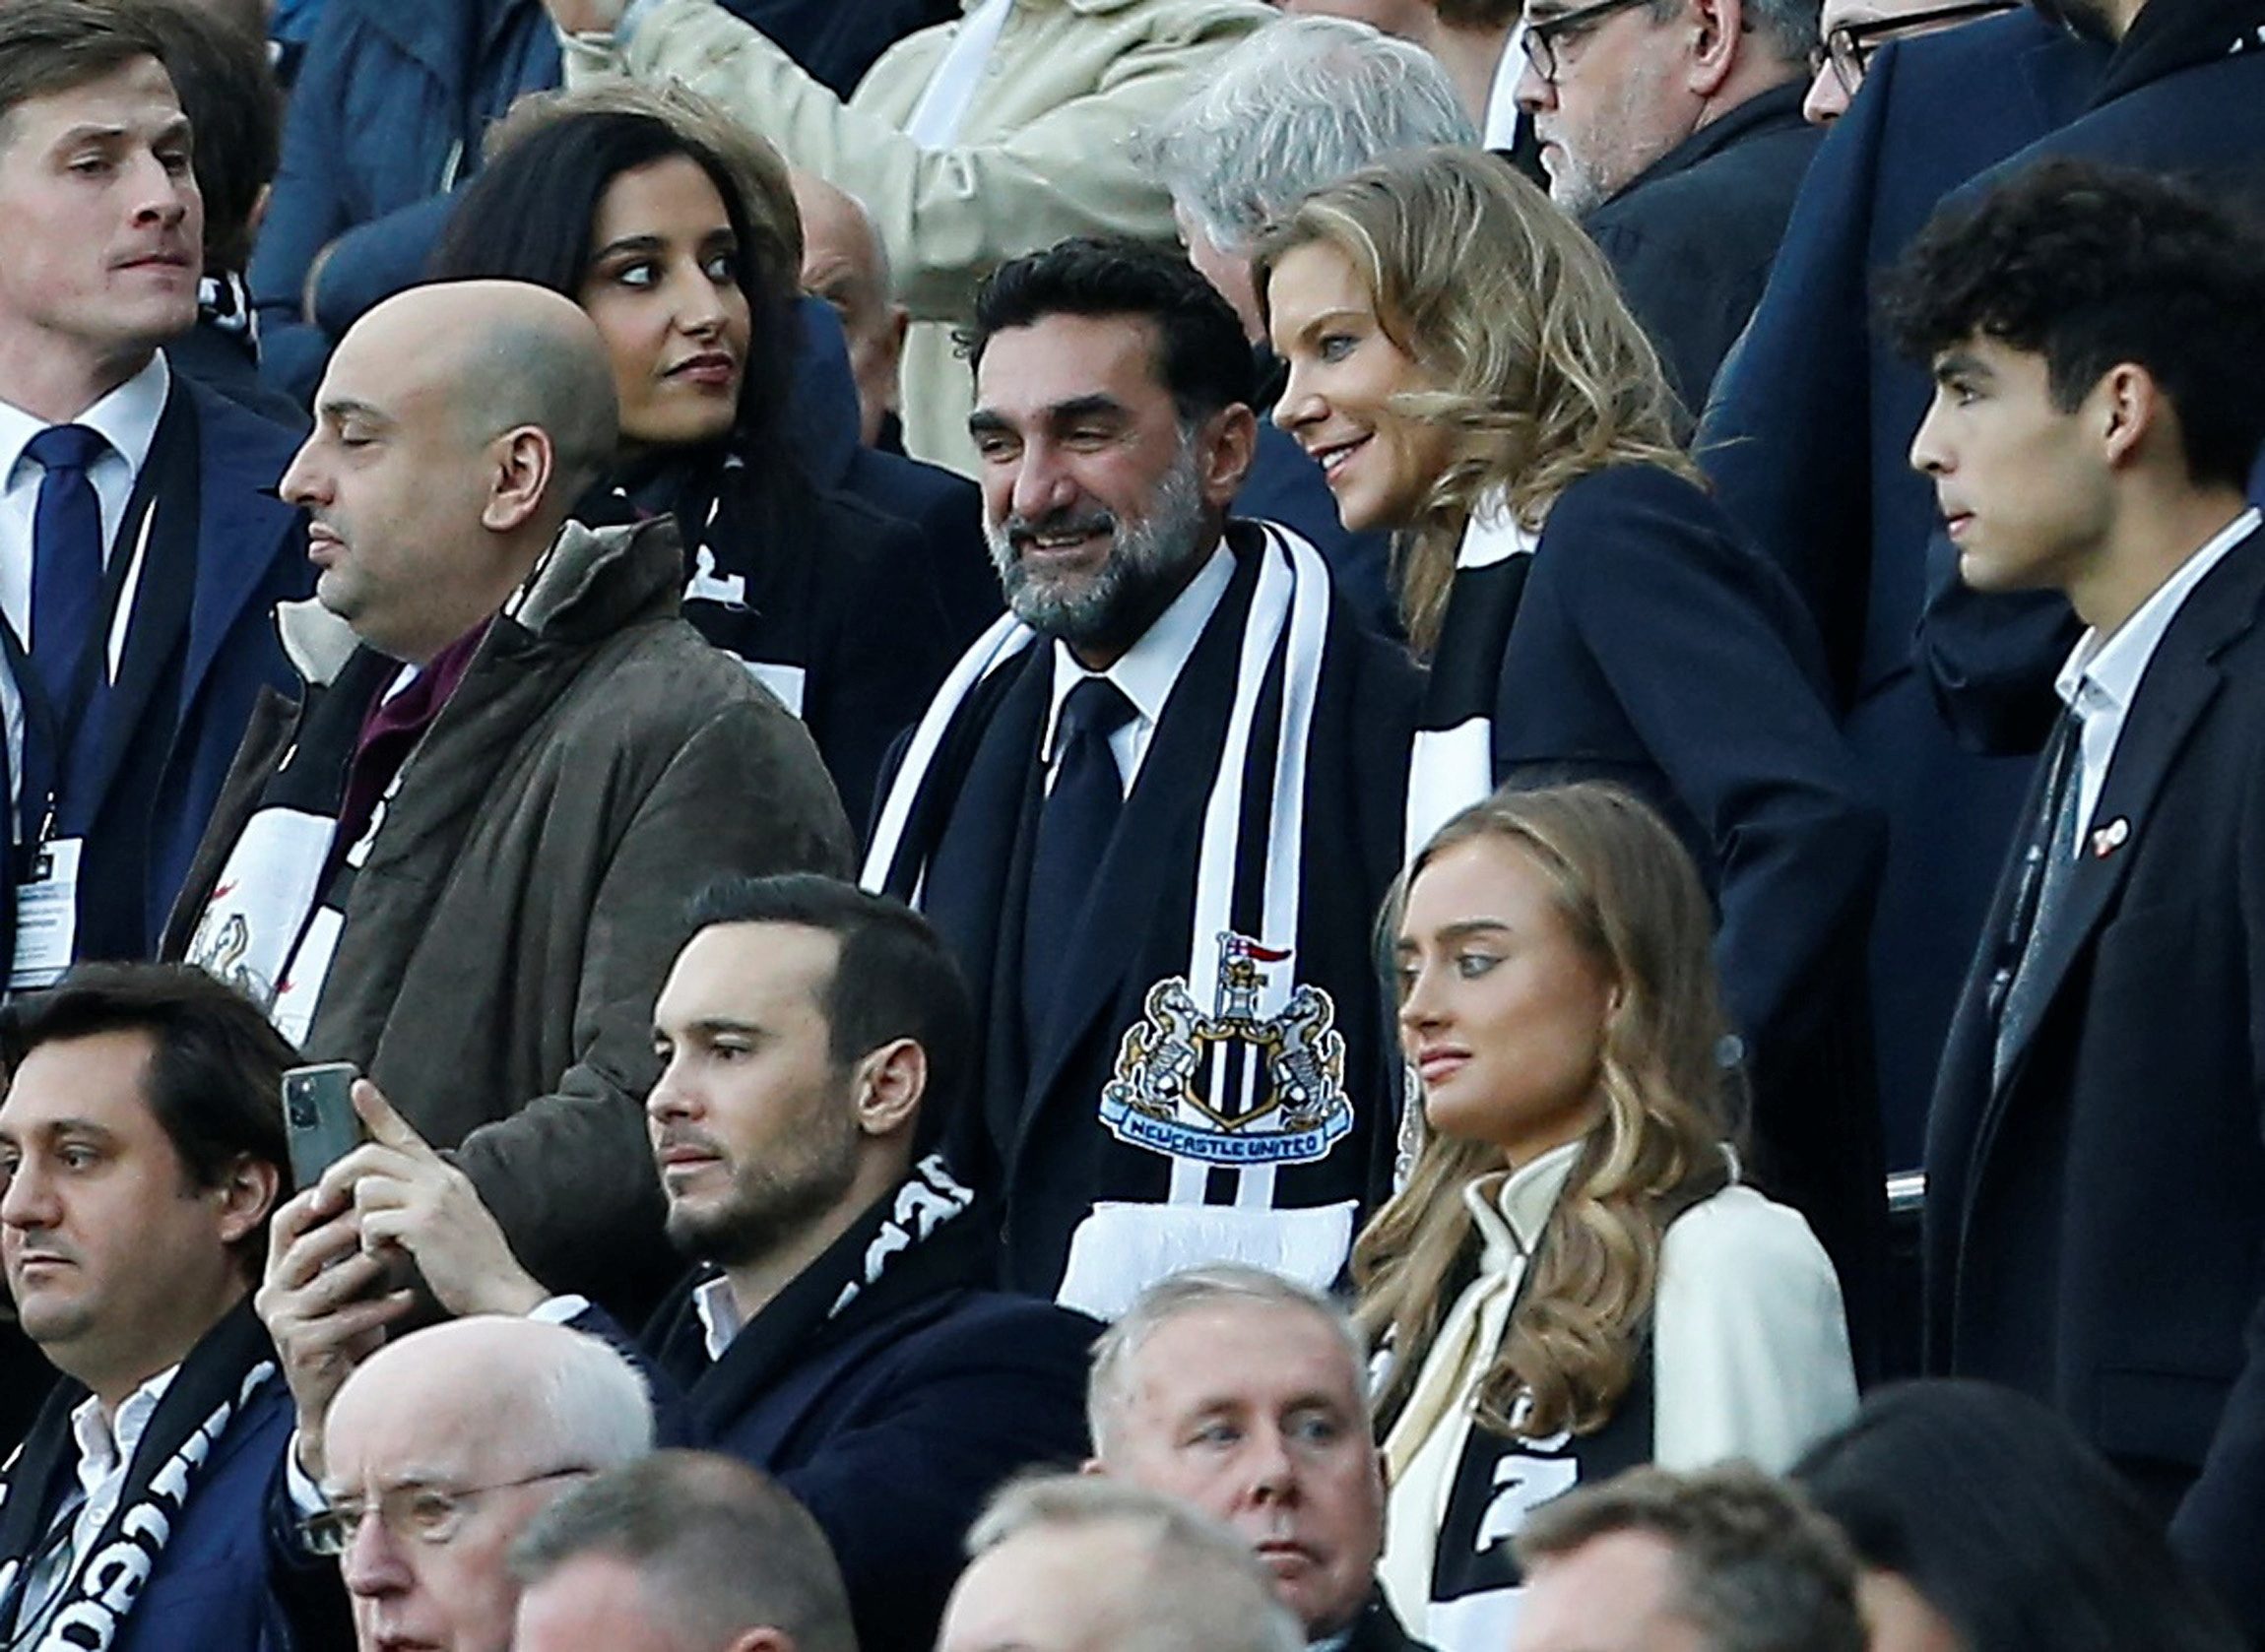 Newcastle United chairman Yasir Al-Rumayyan, who is also governor of Saudi Arabia's Public Investment Fund